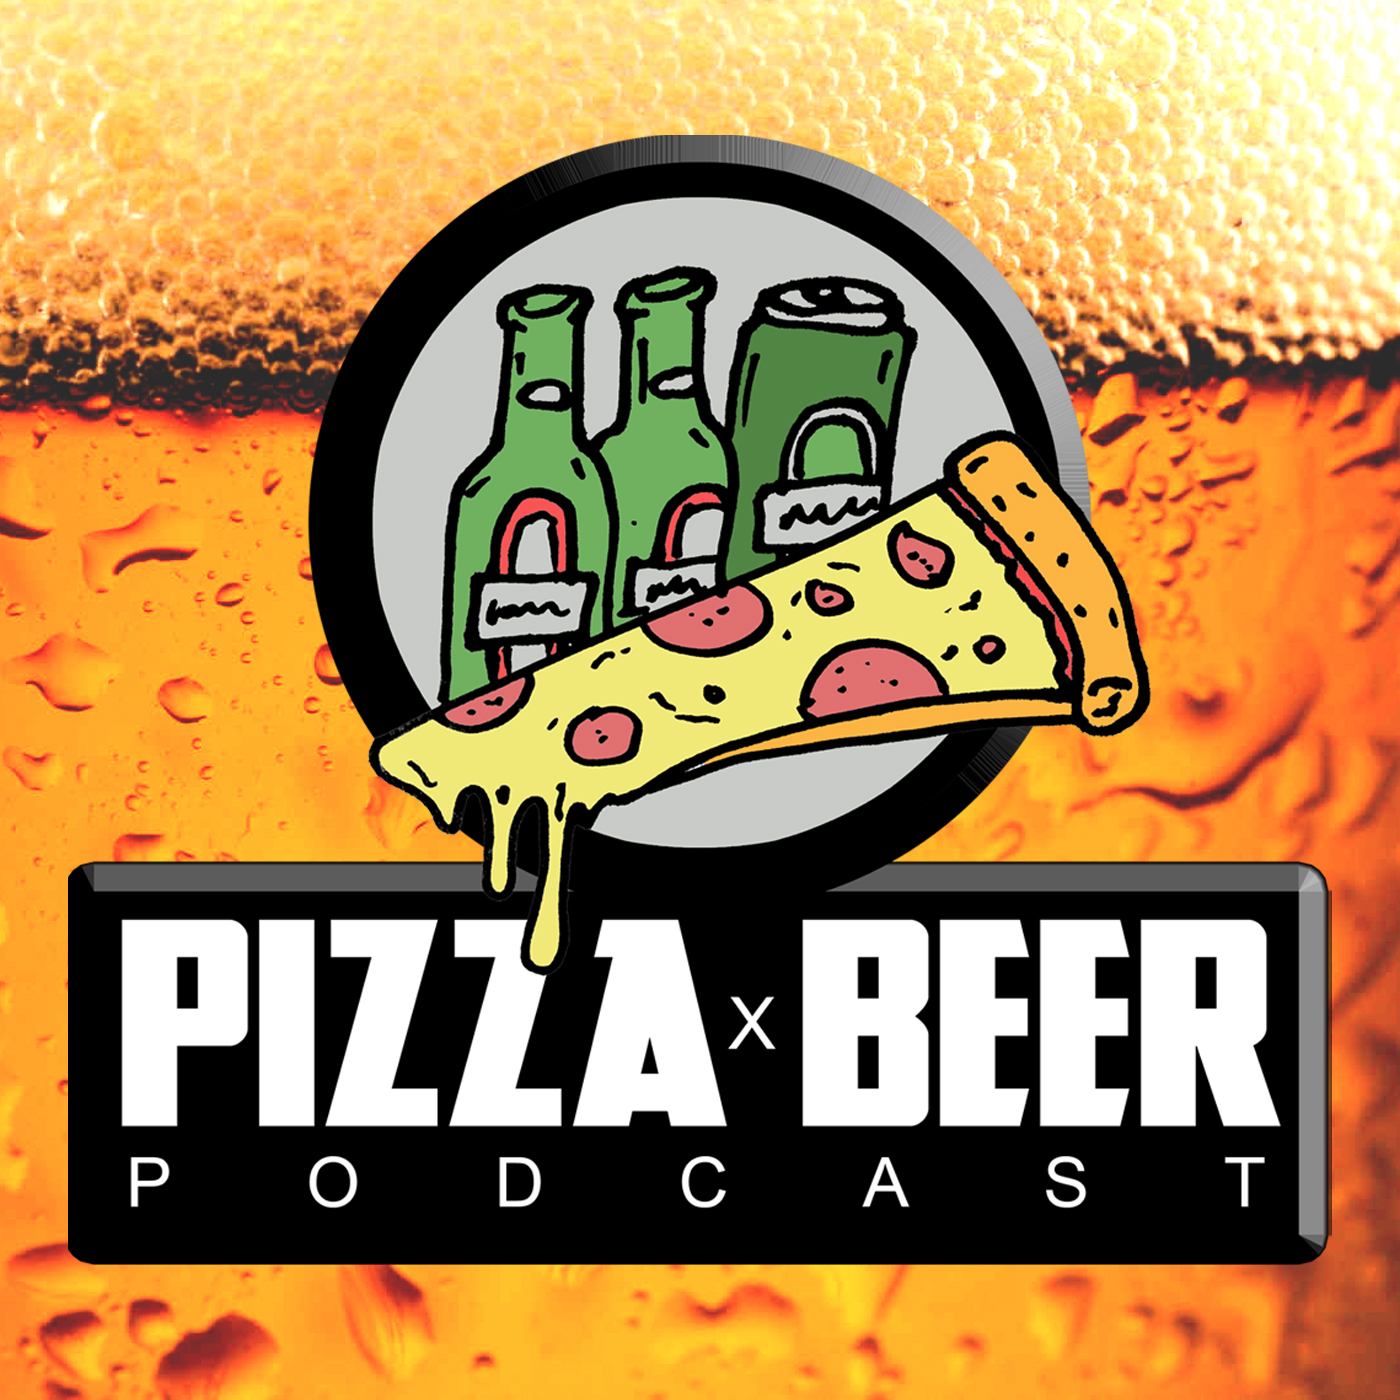 Pizza Beer Podcast